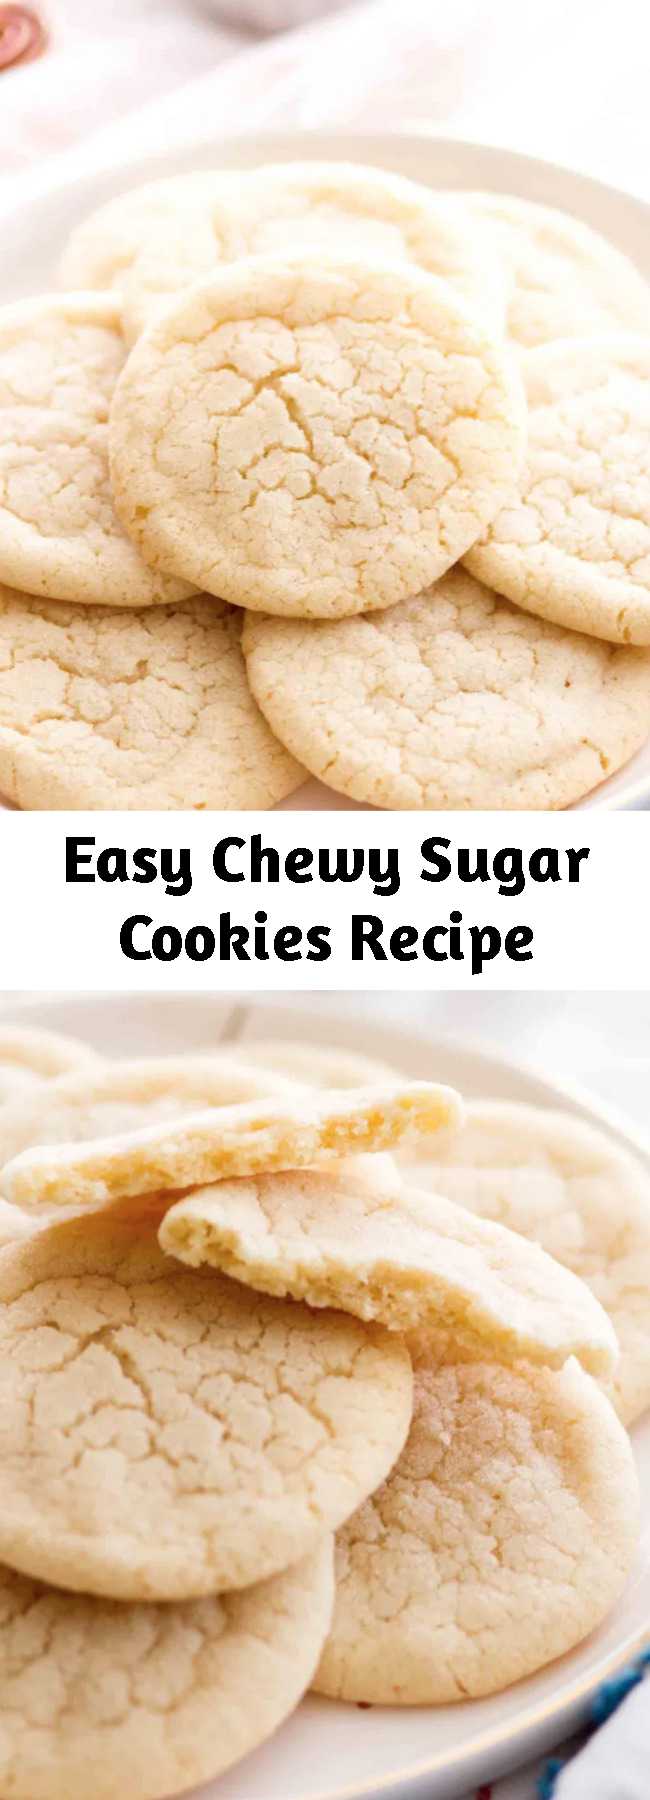 Easy Chewy Sugar Cookies Recipe - These soft and chewy sugar cookies are a Christmas cookie staple, because this is a no chill sugar cookie recipe! The centers are soft and the edges are chewy, making this one of my favorite sugar cookie recipes of all time!